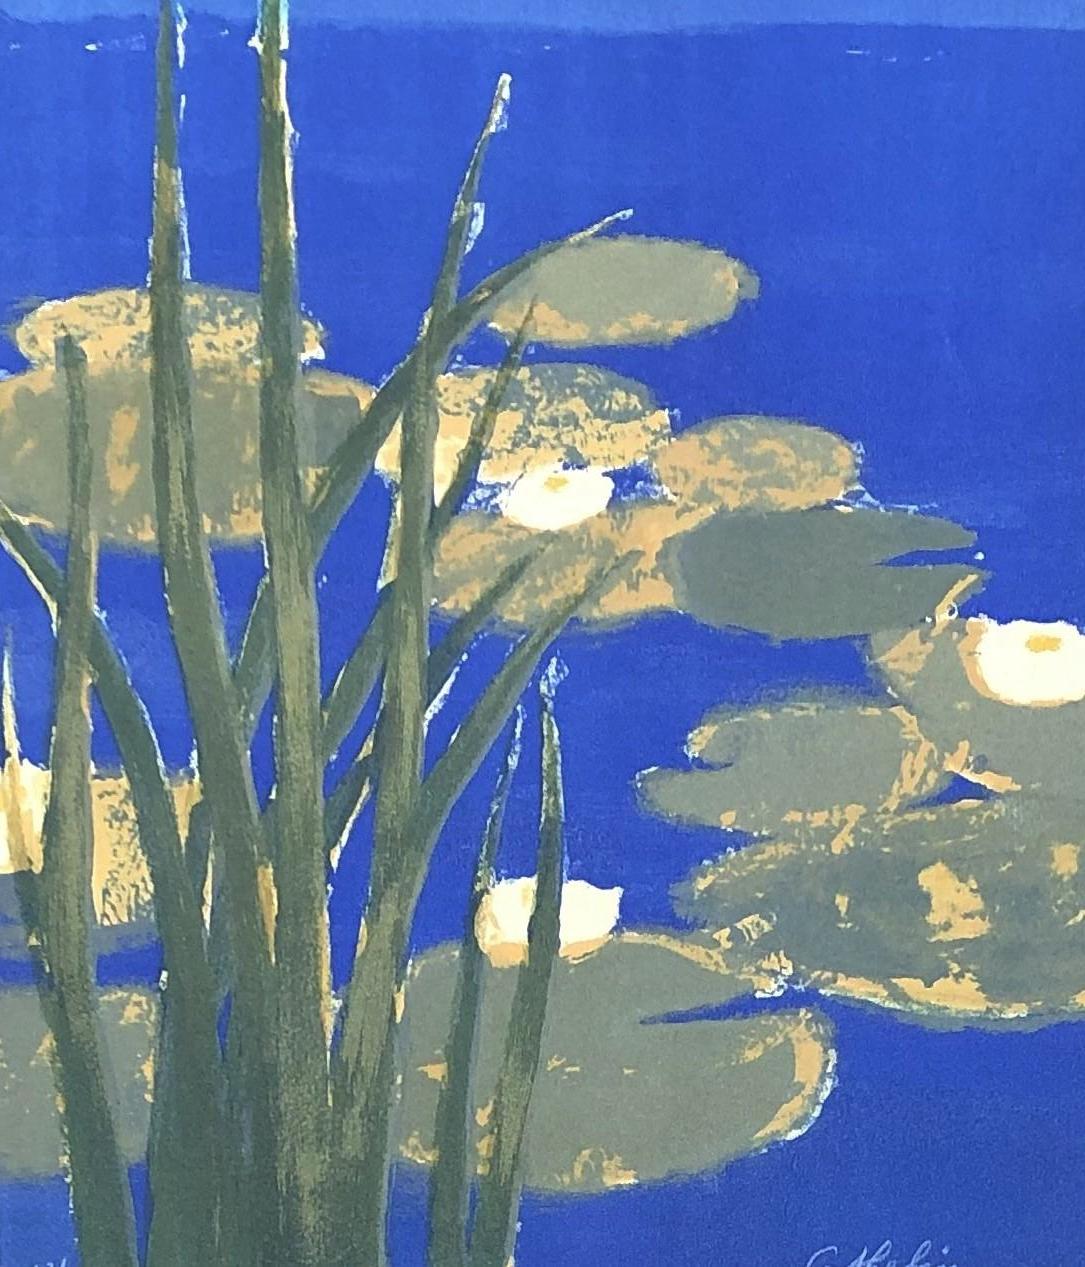 Water Lilies - Original lithograph handsigned - 100 copies - Print by Bernard Cathelin